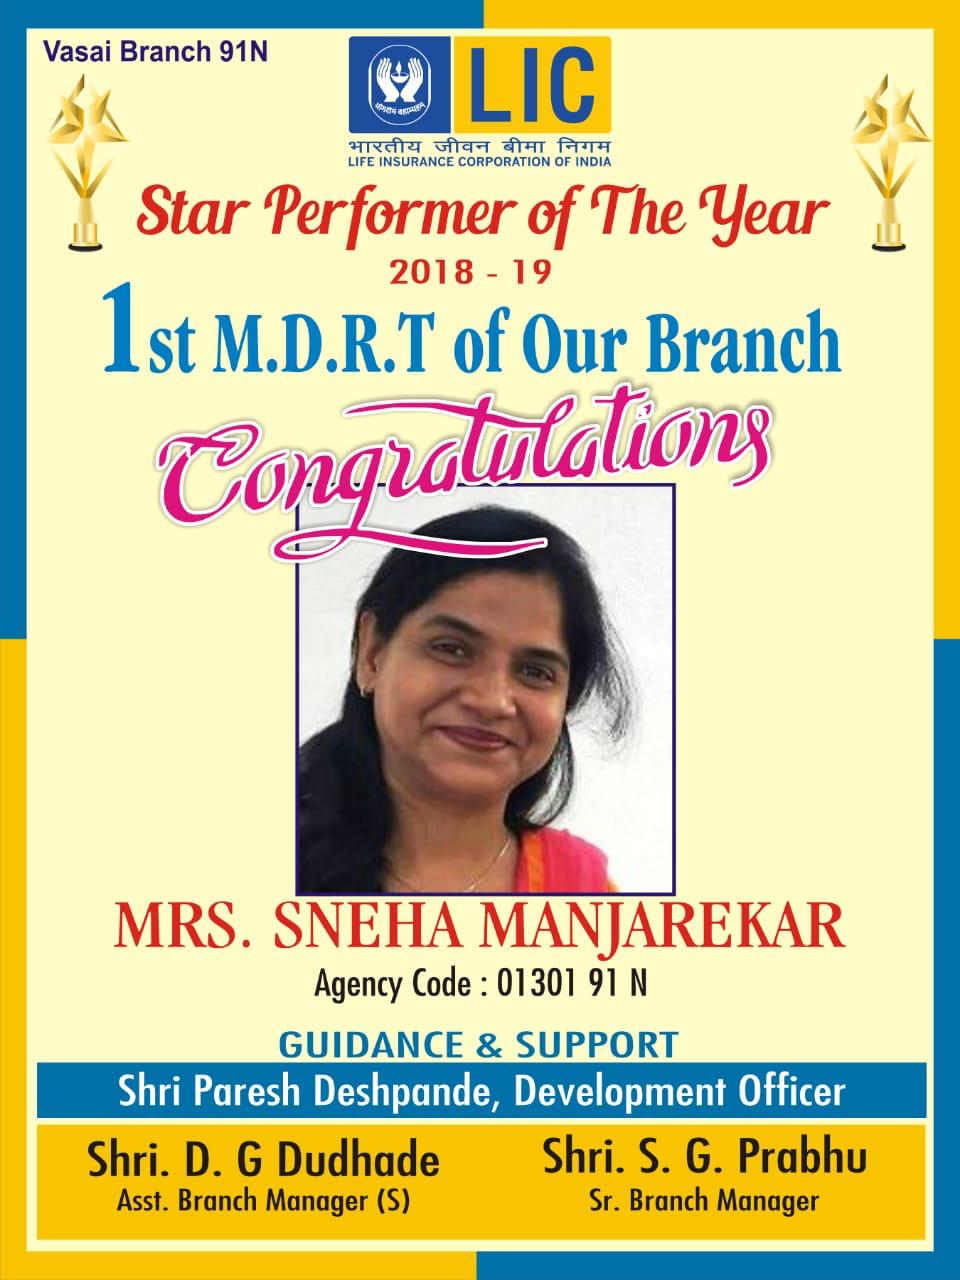 Was awarded the star performer of the year after successfully becoming the first MDRT of the the branch for the year 2018-19